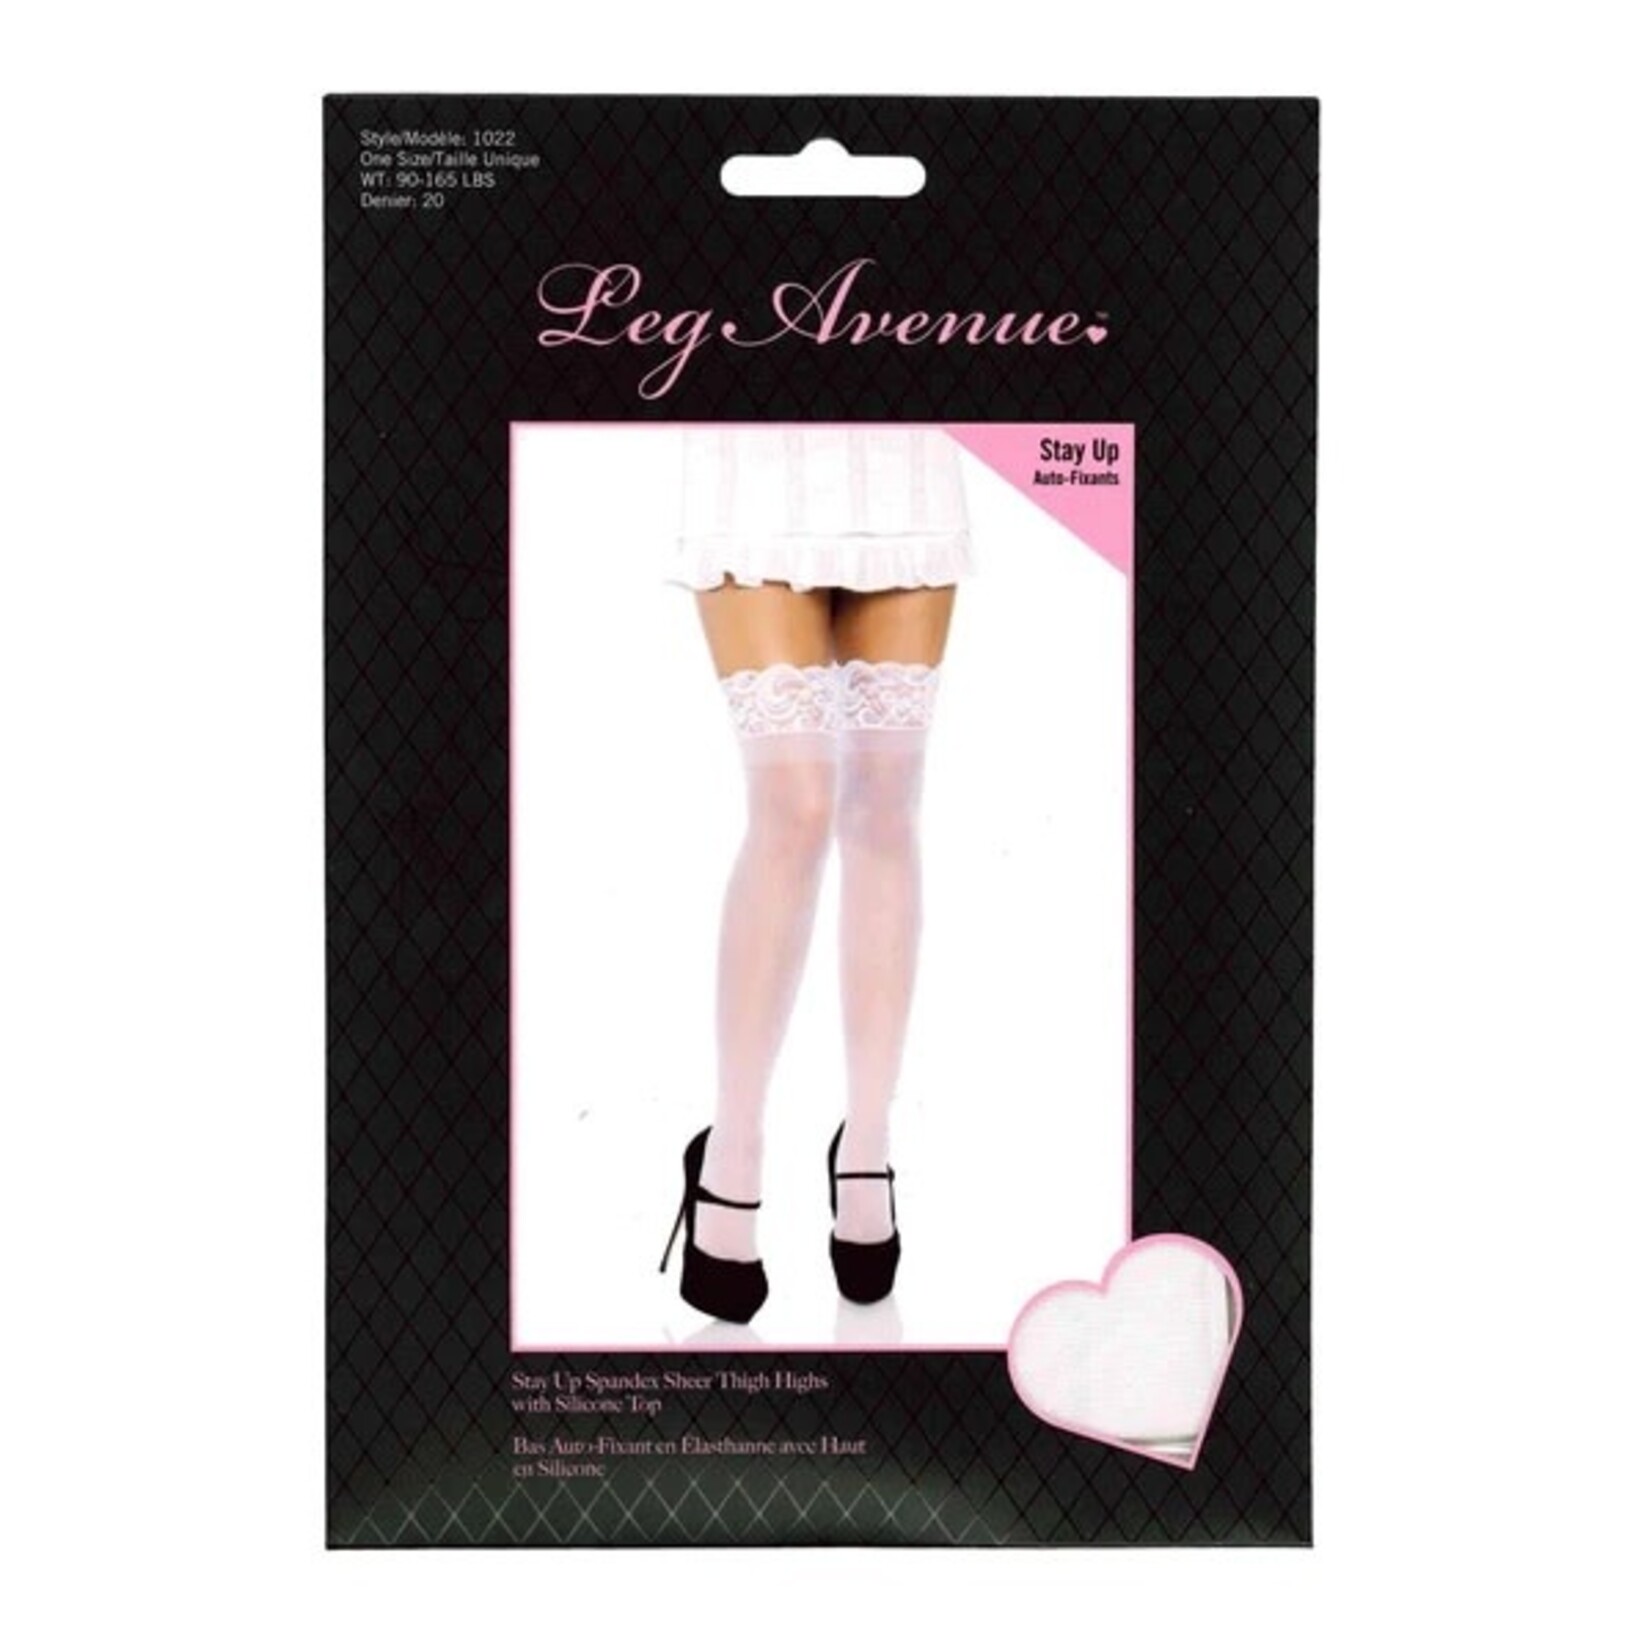 LEG AVENUE LEG AVENUE SILICONE STAY UP LACE TOP SPANDEX SHEER THIGH HIGHS  WHITE  O/S